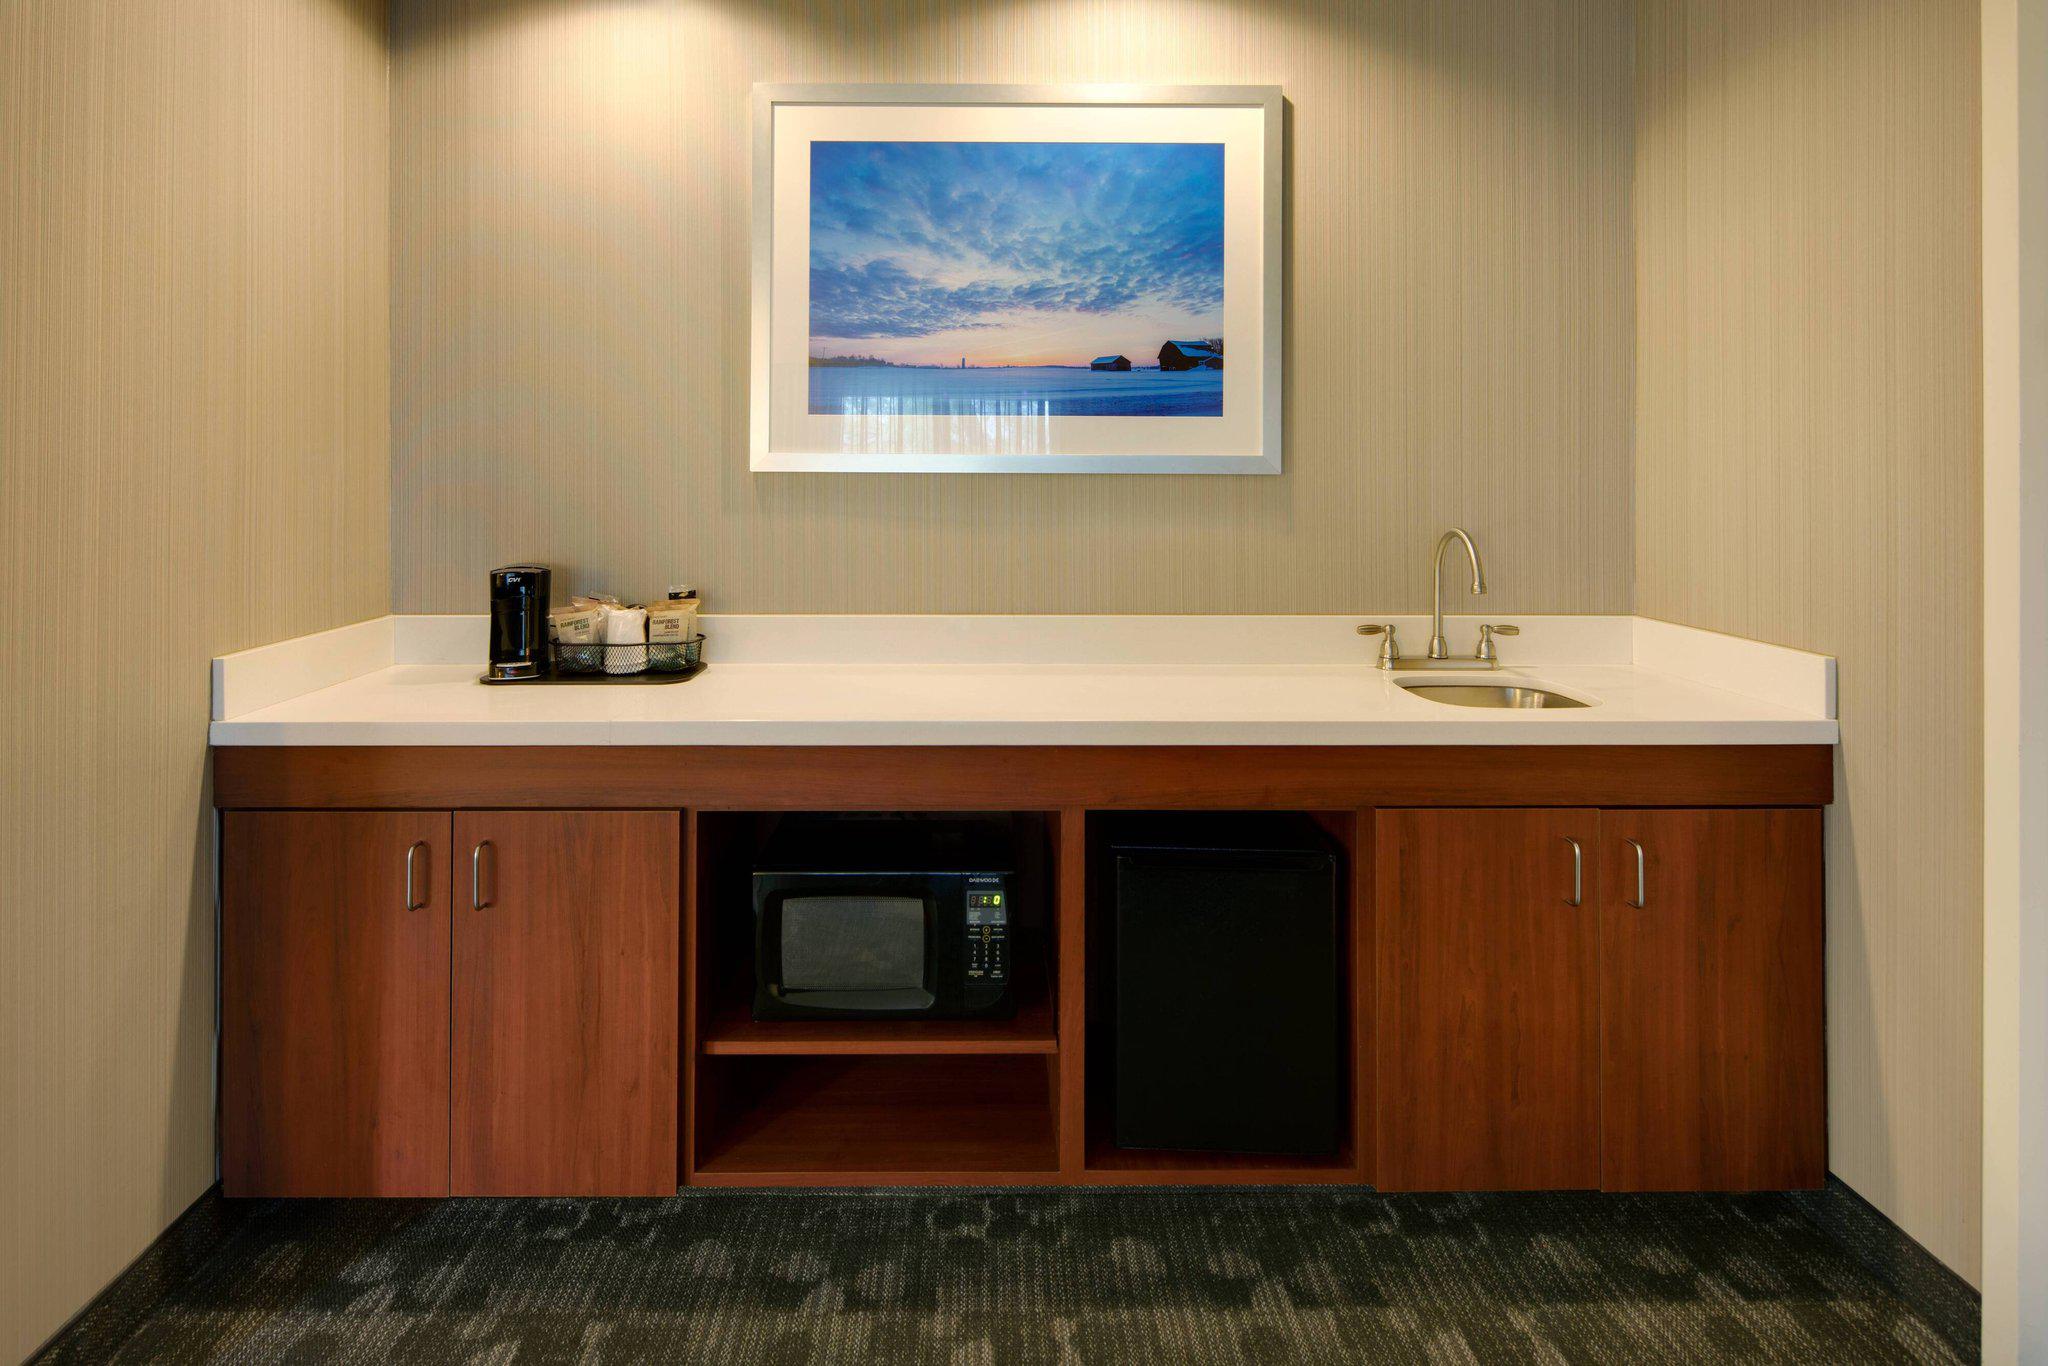 Courtyard by Marriott Grand Rapids Airport Photo